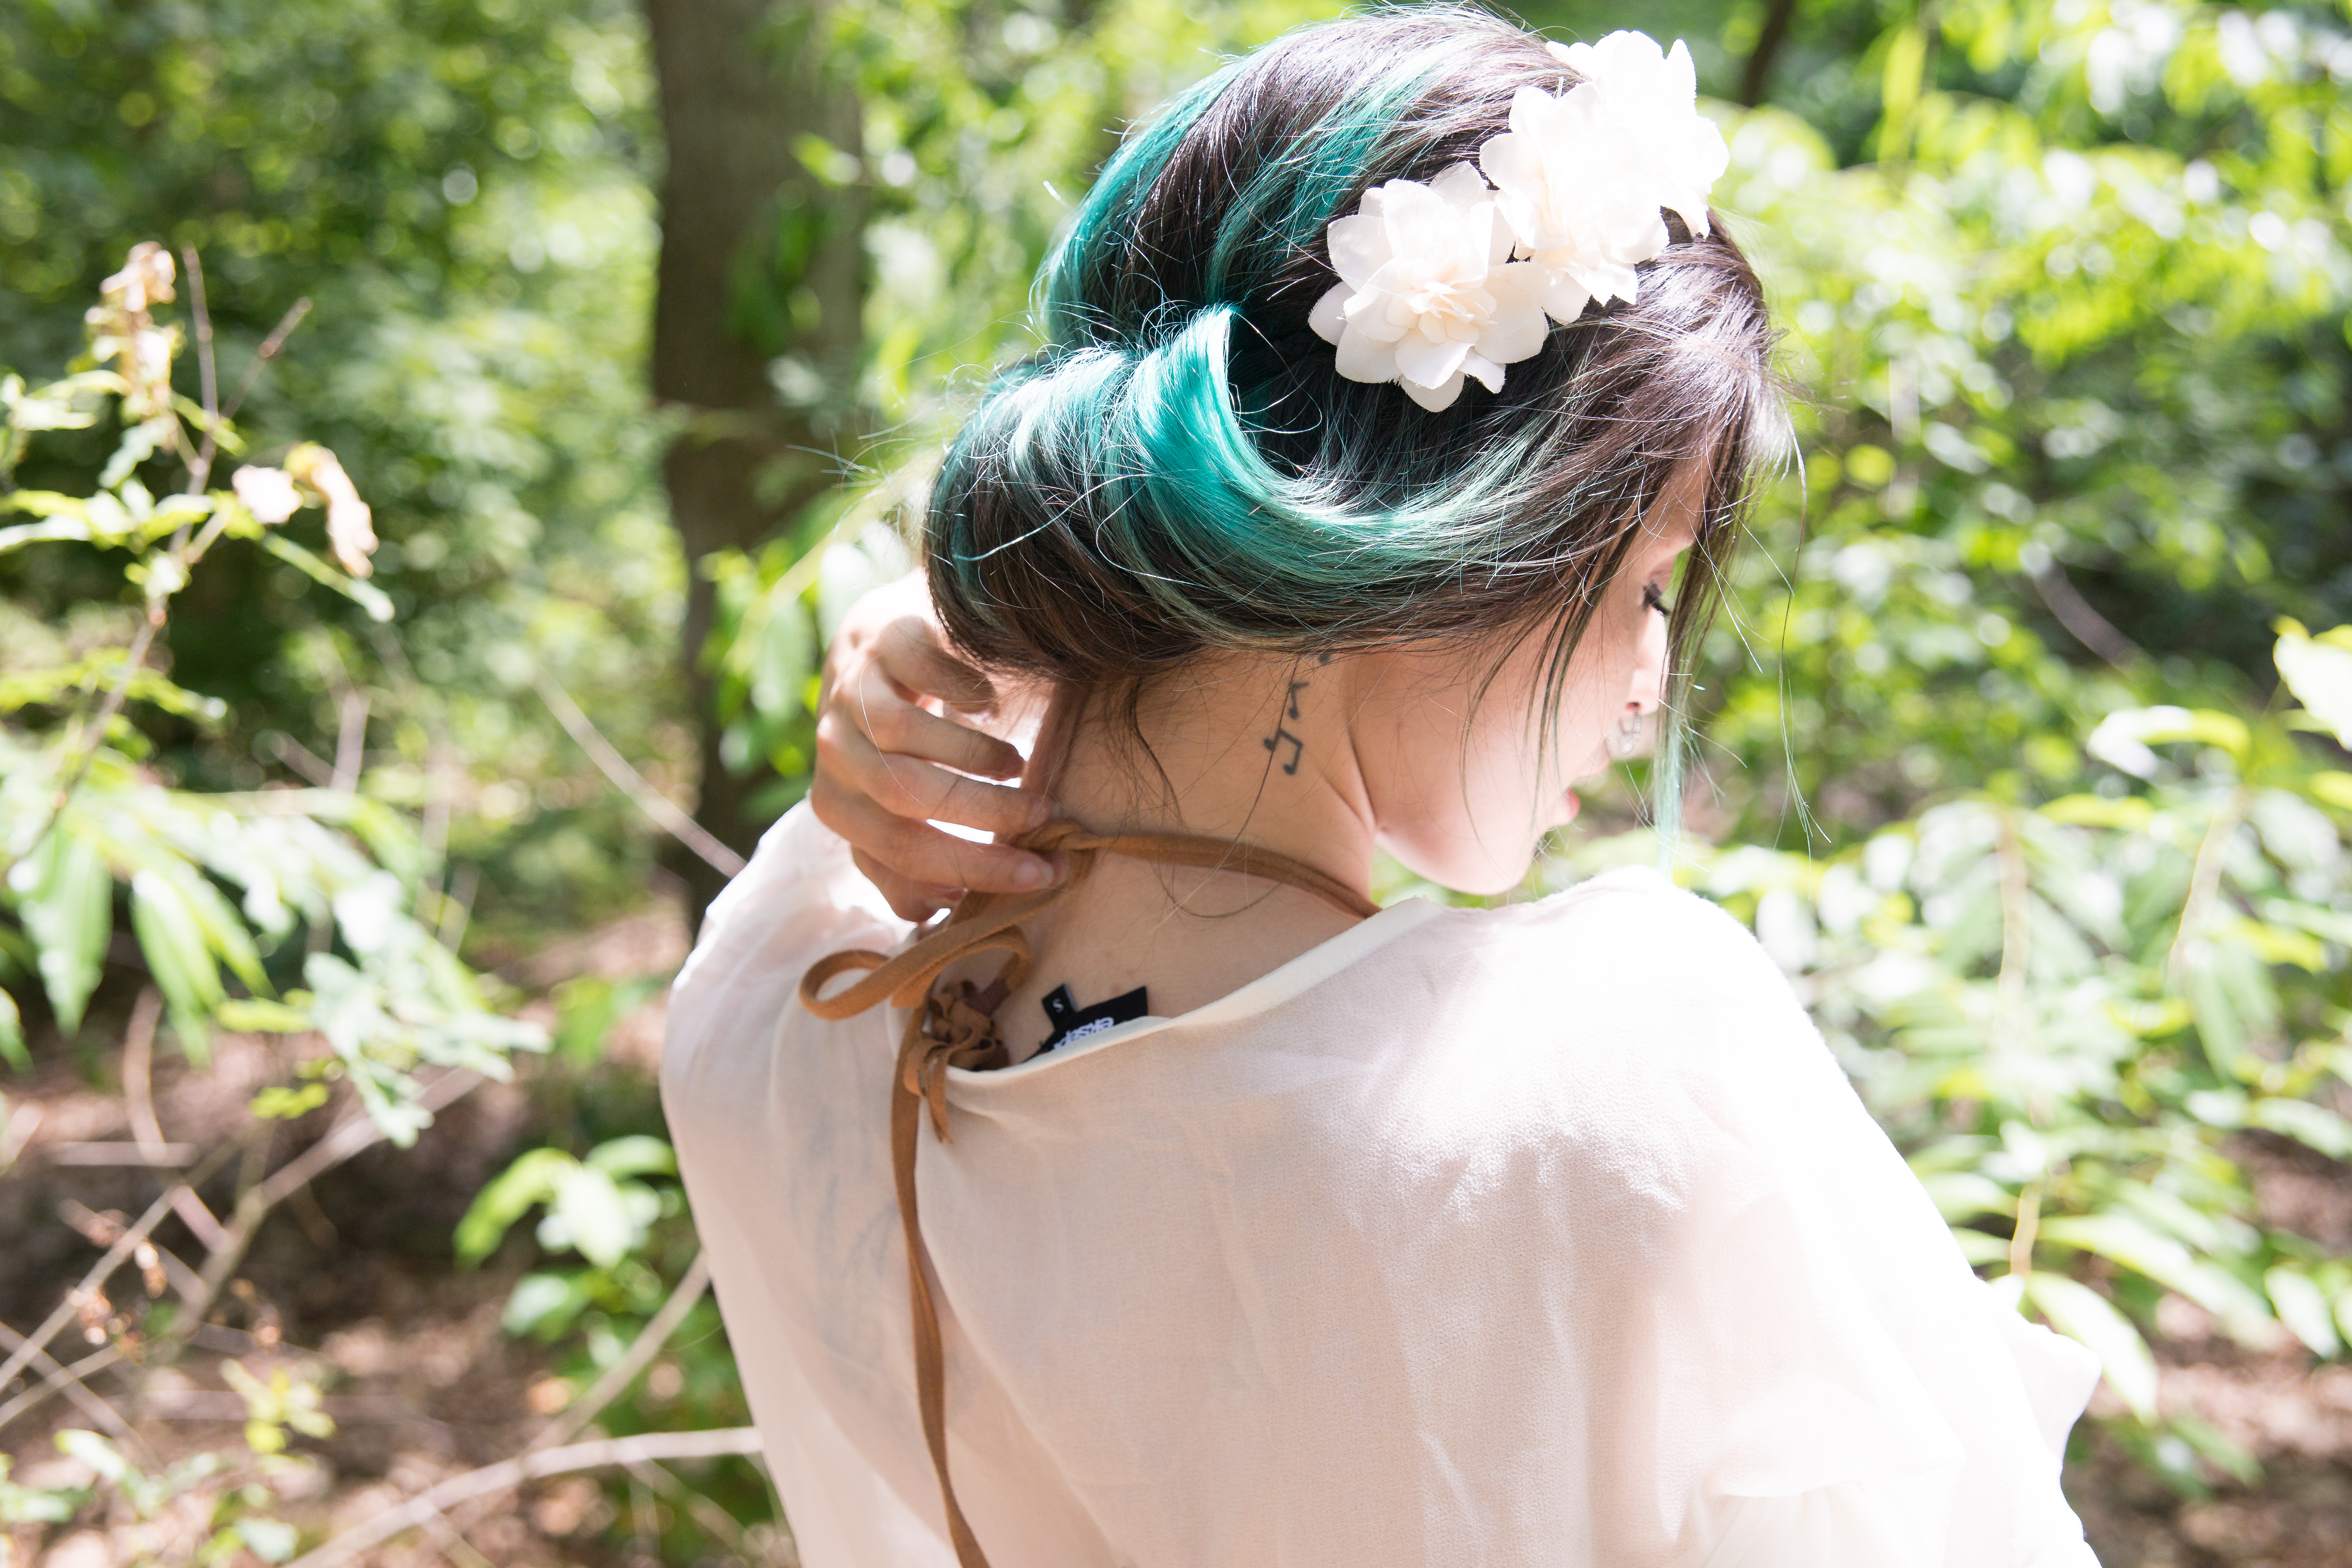 People 6000x4000 Nova Anne Dutch women women outdoors photography model forest trees leaves sensual gaze piercing tattoo see-through clothing depth of field closed eyes undressing removing bra flower crown dyed hair sun rays back cyan hair closeup rear view